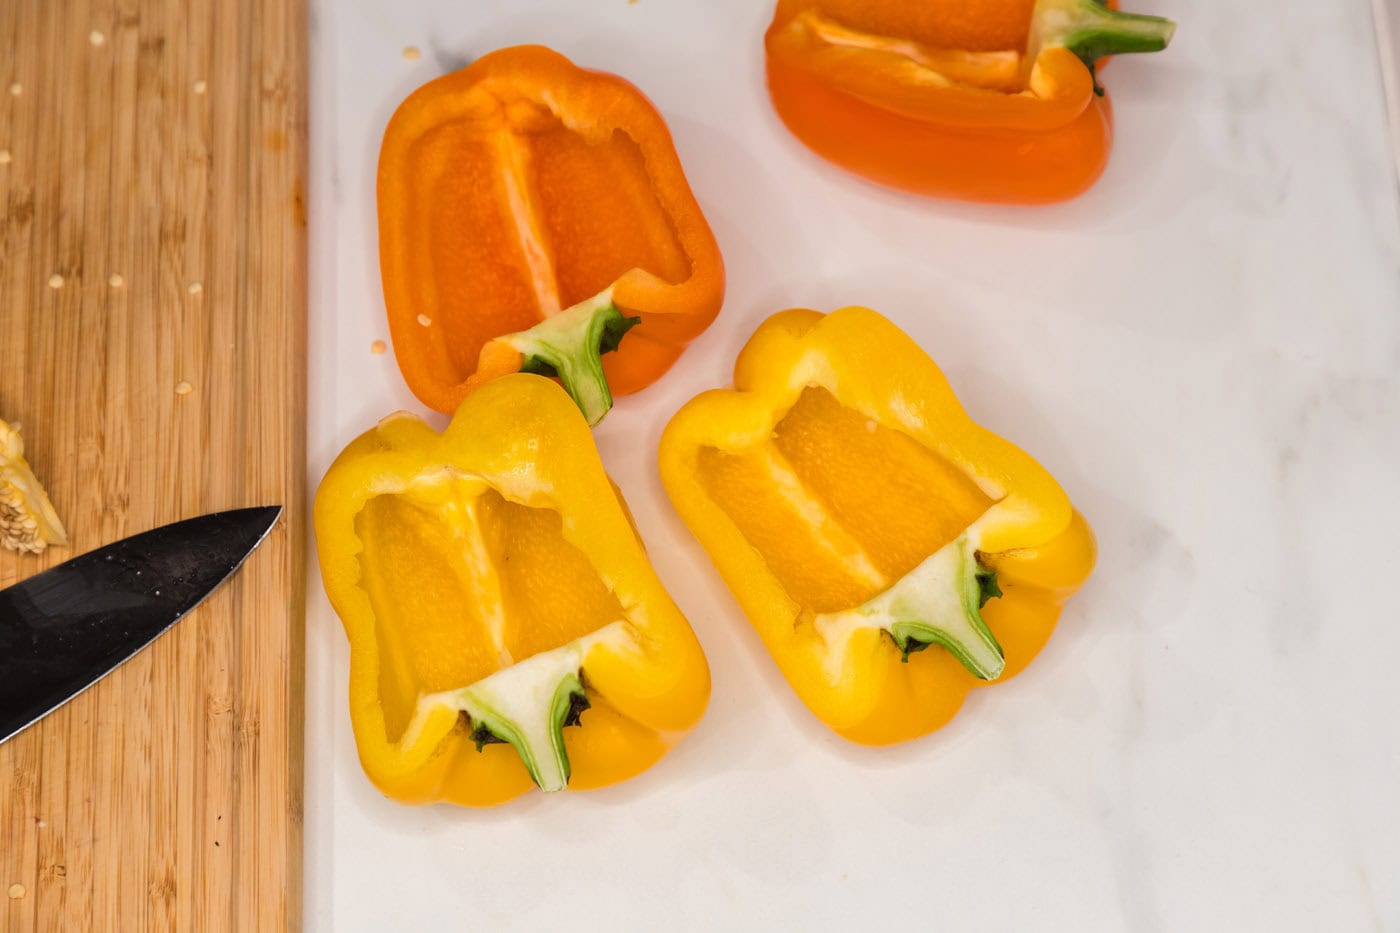 hollowed out orange and yellow bell peppers